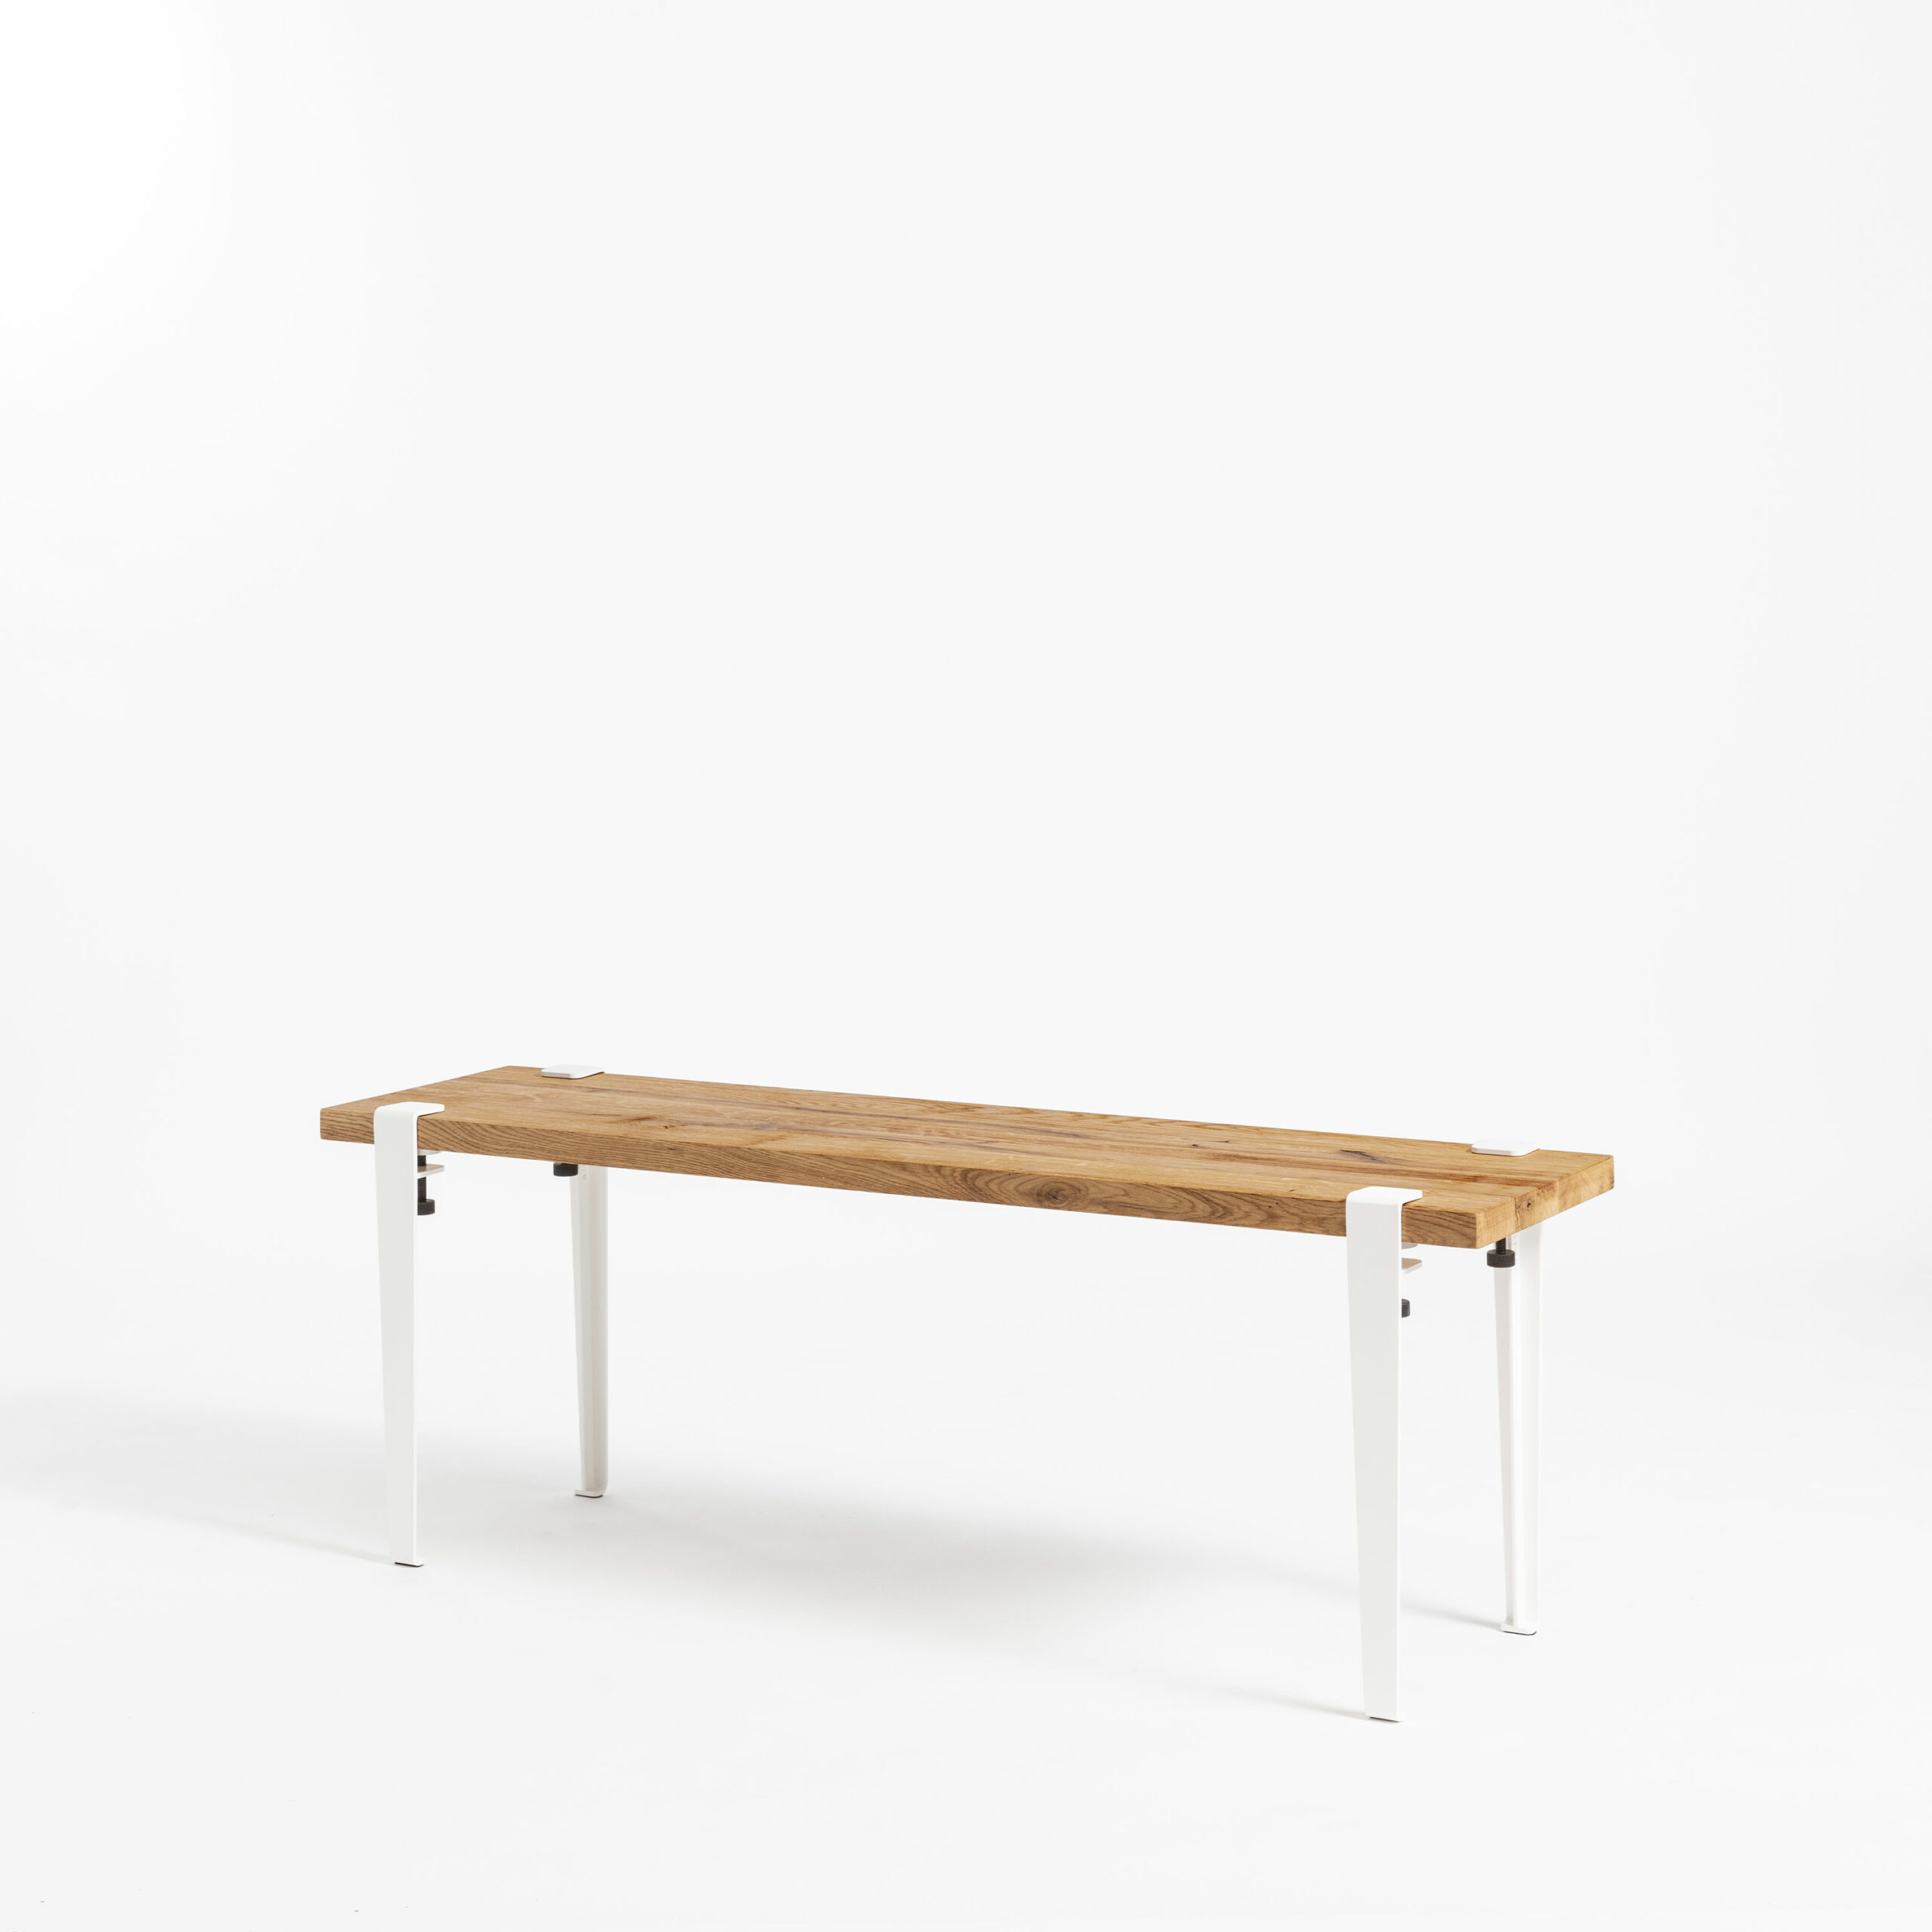 Old wood bench for a warm atmosphere by TIPTOE